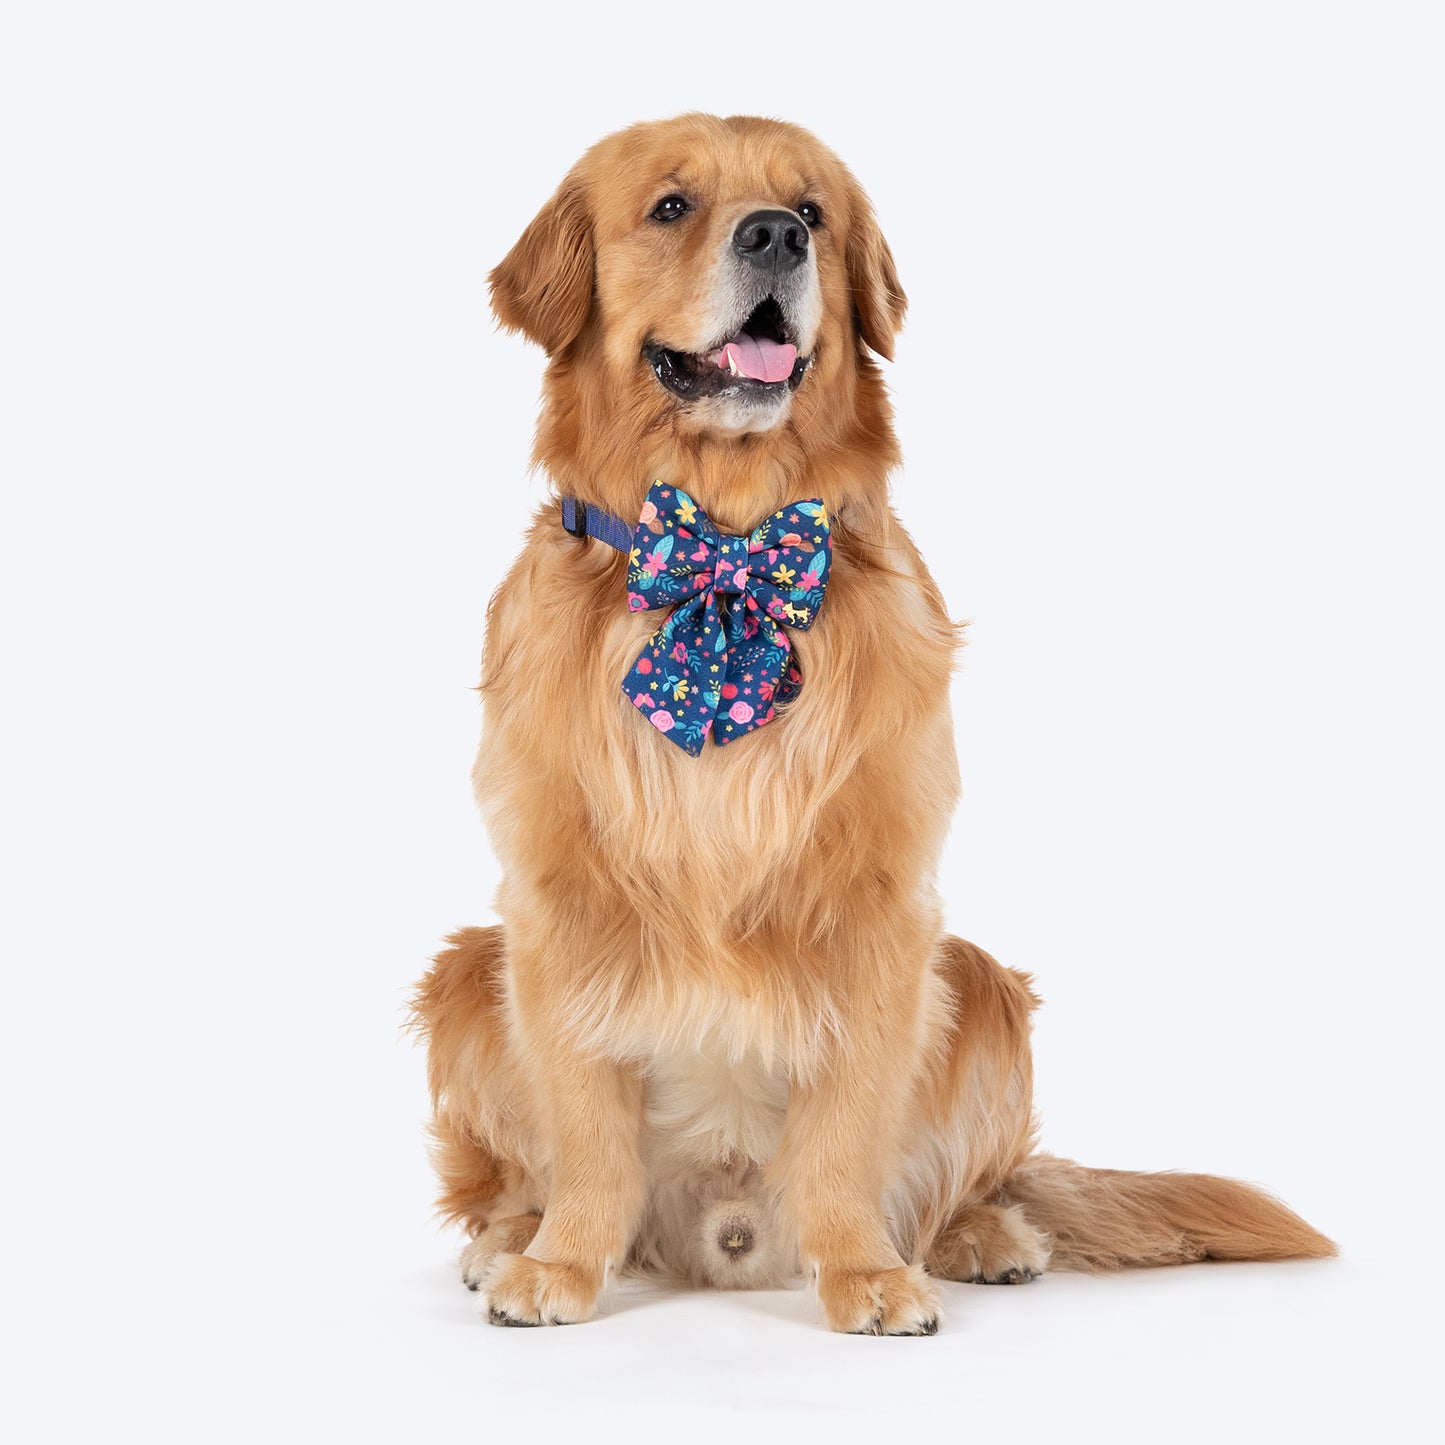 HUFT Bloomscape Printed Lady Bow Tie for Dog - Navy - Heads Up For Tails